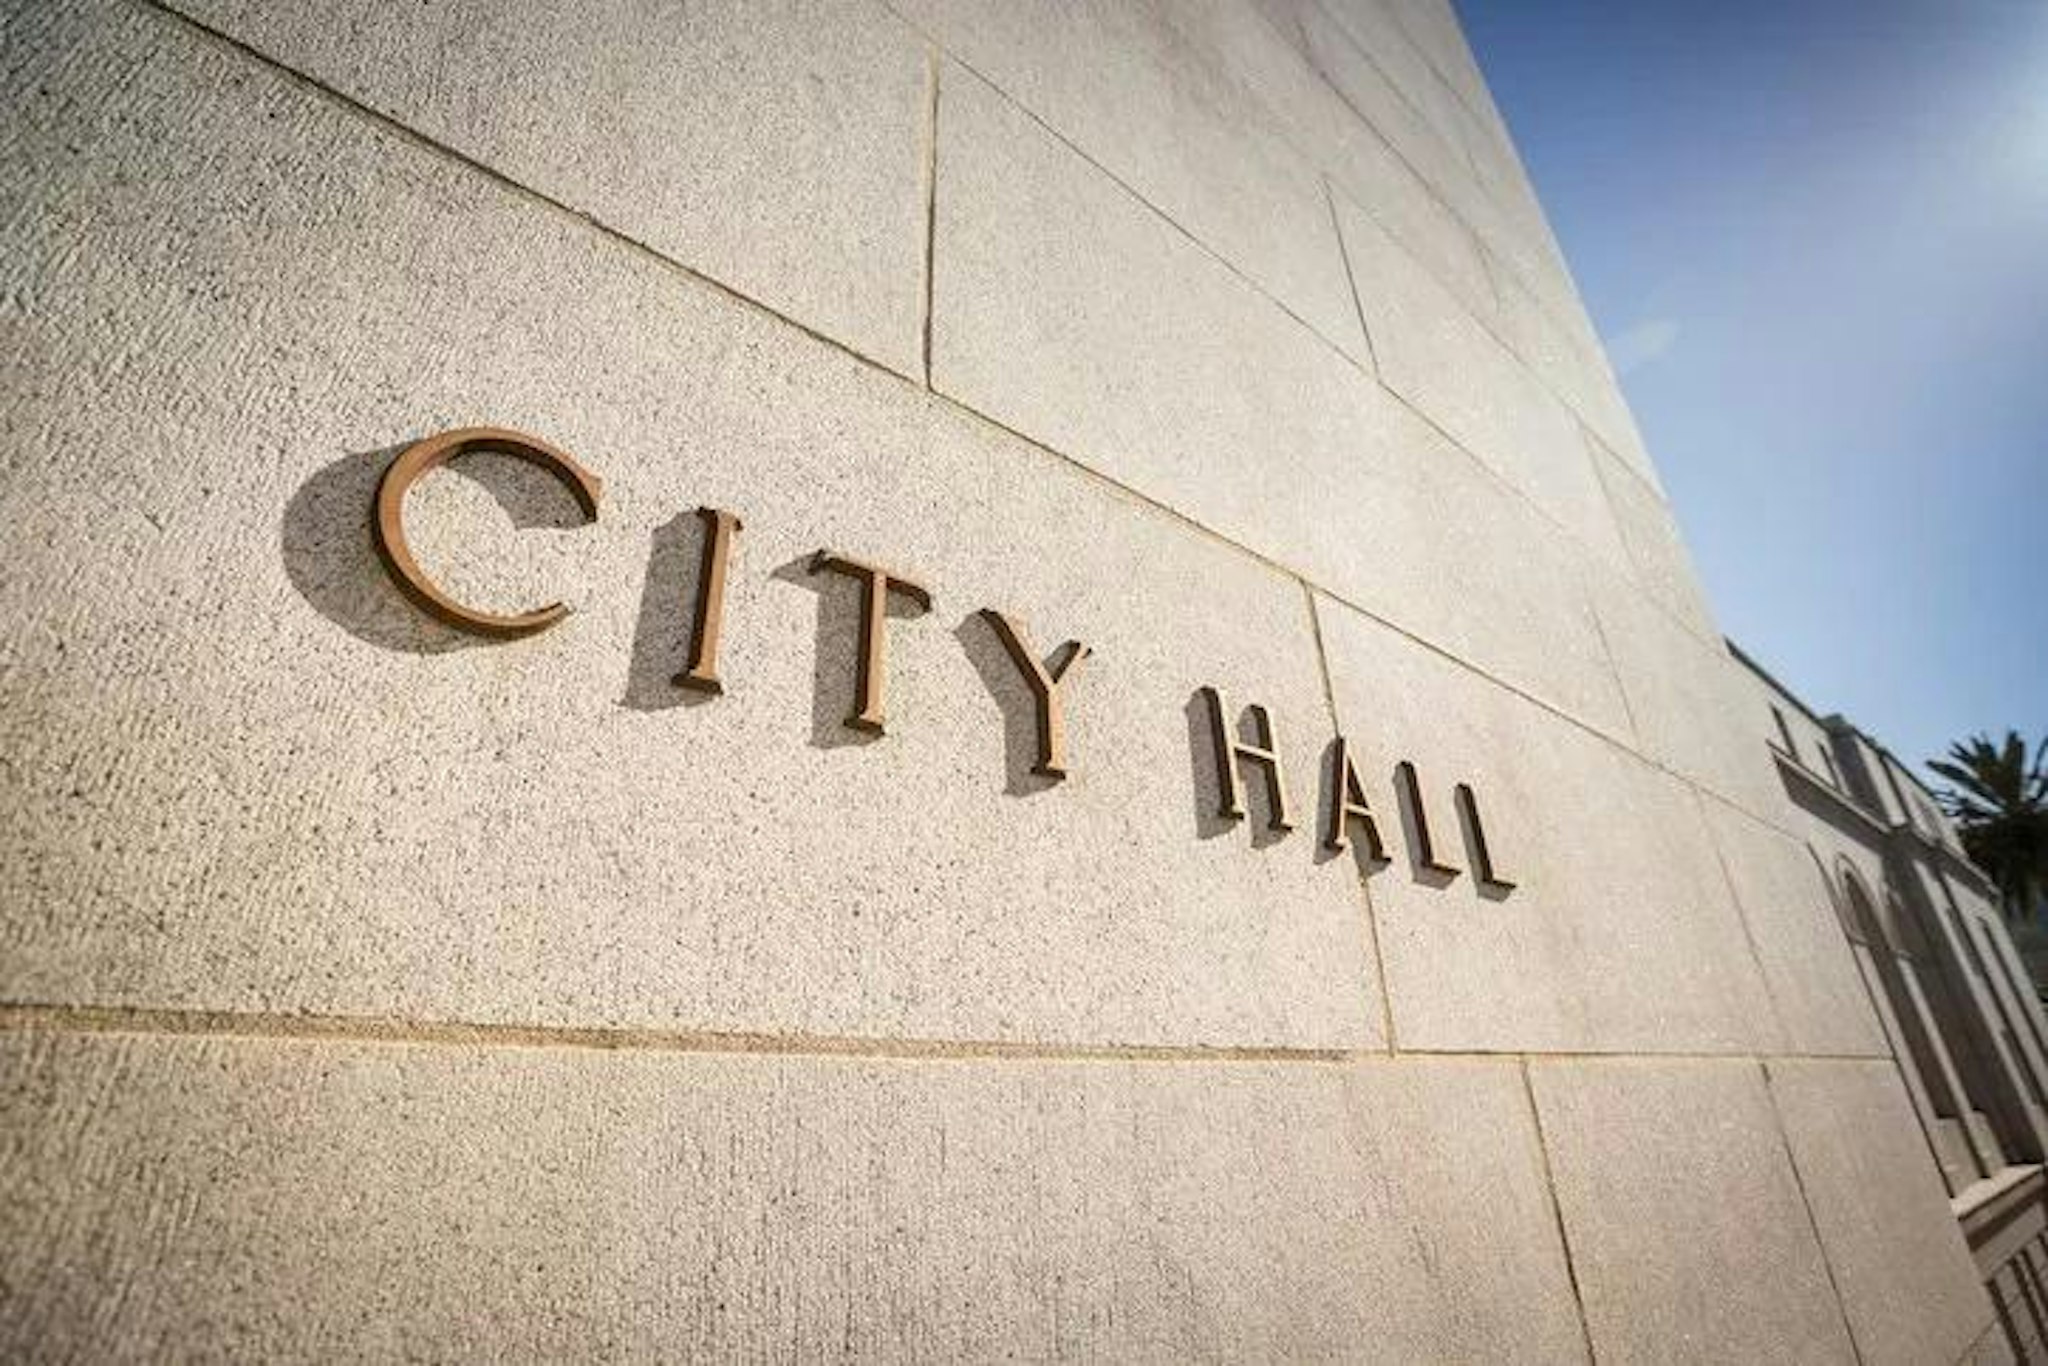 Image of building with "city hall" sign on the front.